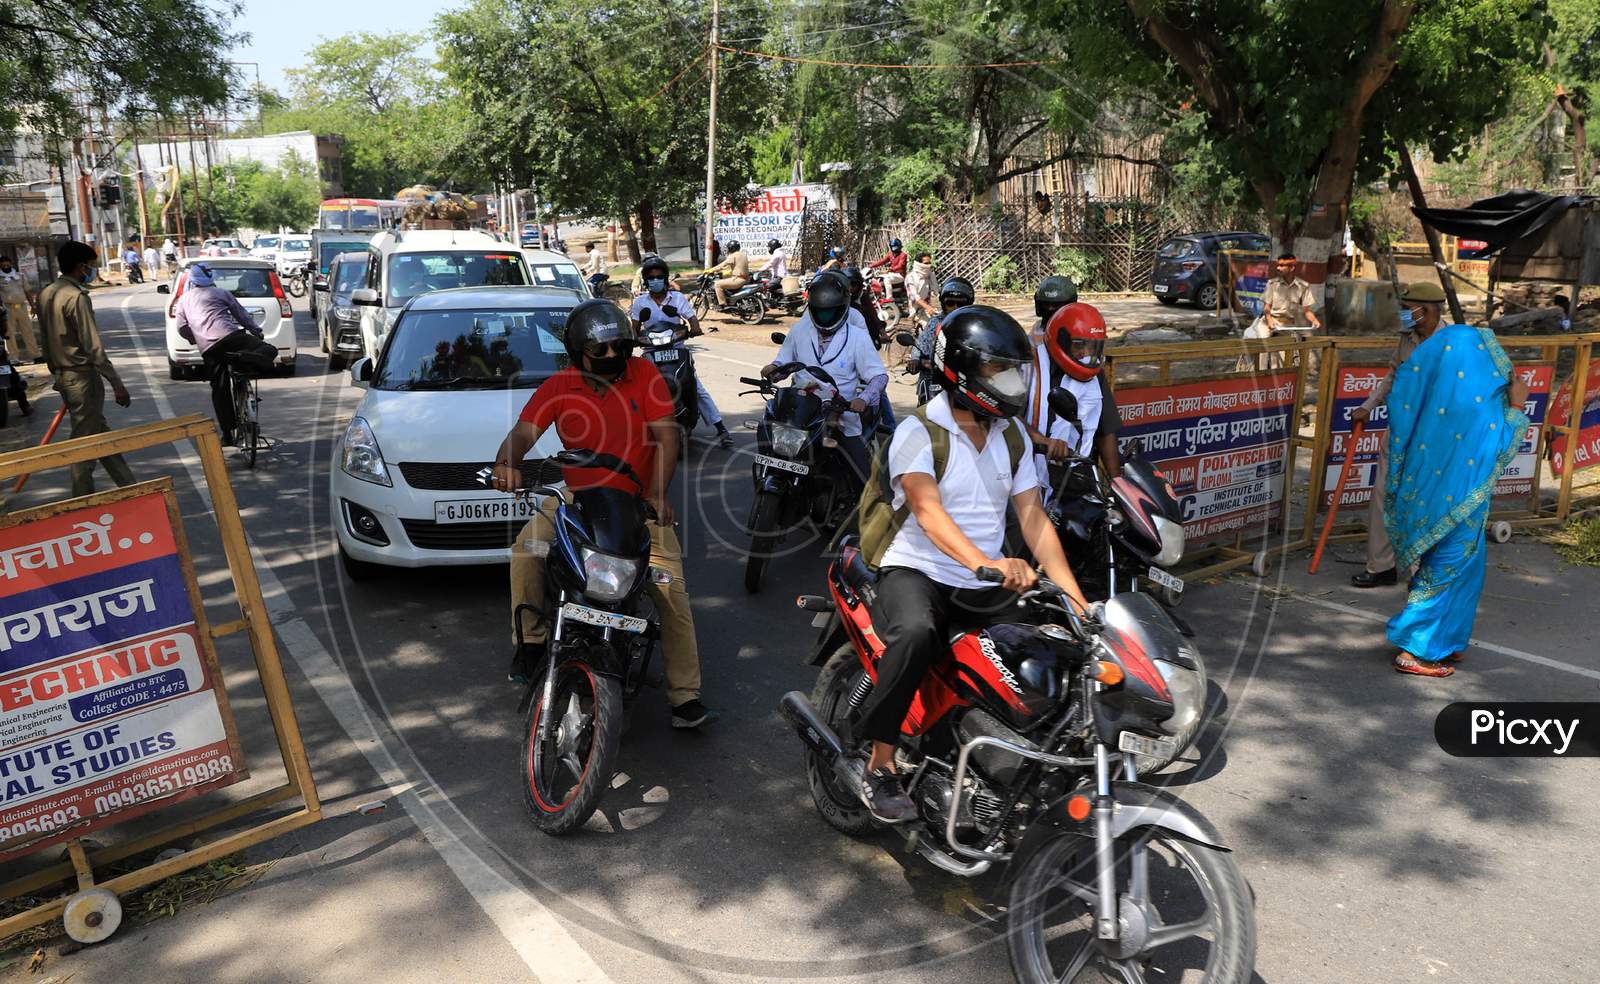 People Drive Through Barricades At City Entrance Points As They Enter The Prayagraj City During Nationwide Lockdown Amidst Coronavirus Or Covid-19 Pandemic In Prayagraj, May 12, 2020